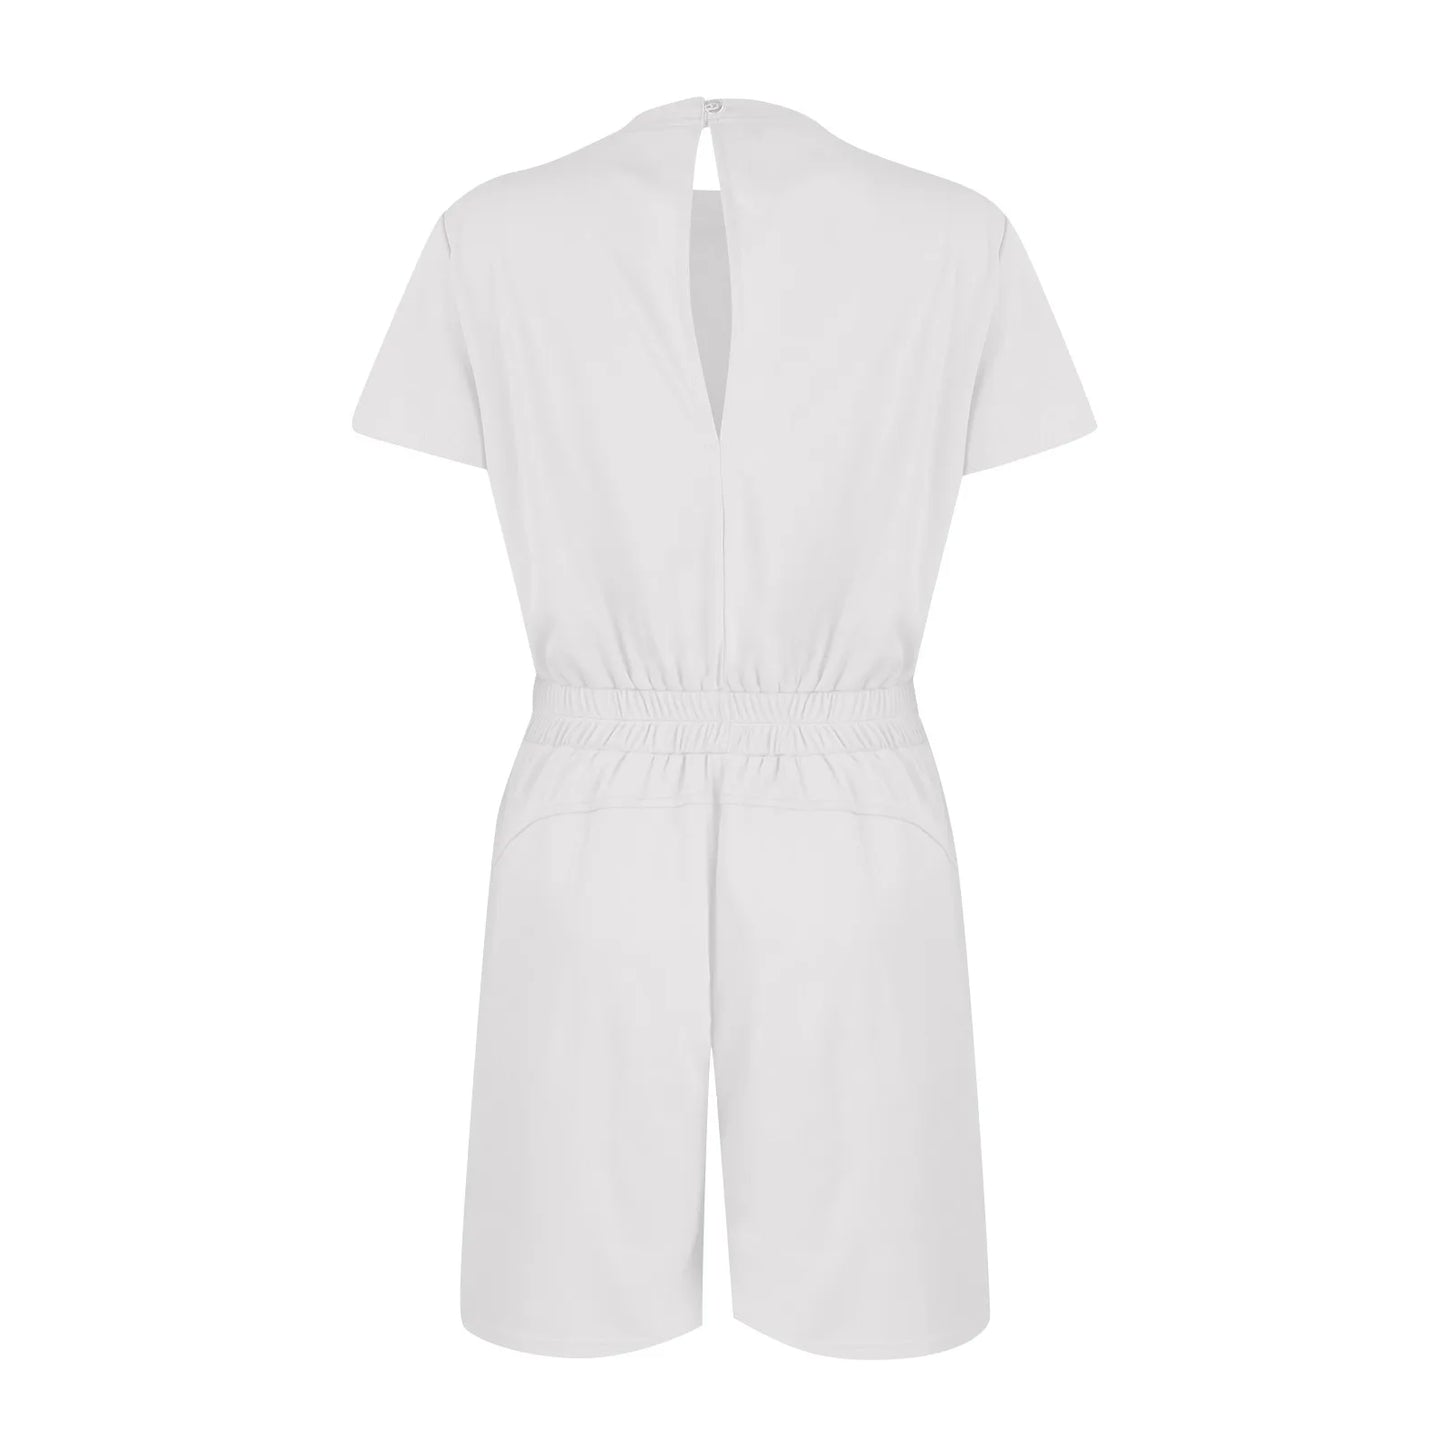 Rompers- Casual Women's Gathered-Waist Romper - Tee Playsuit- - Chuzko Women Clothing